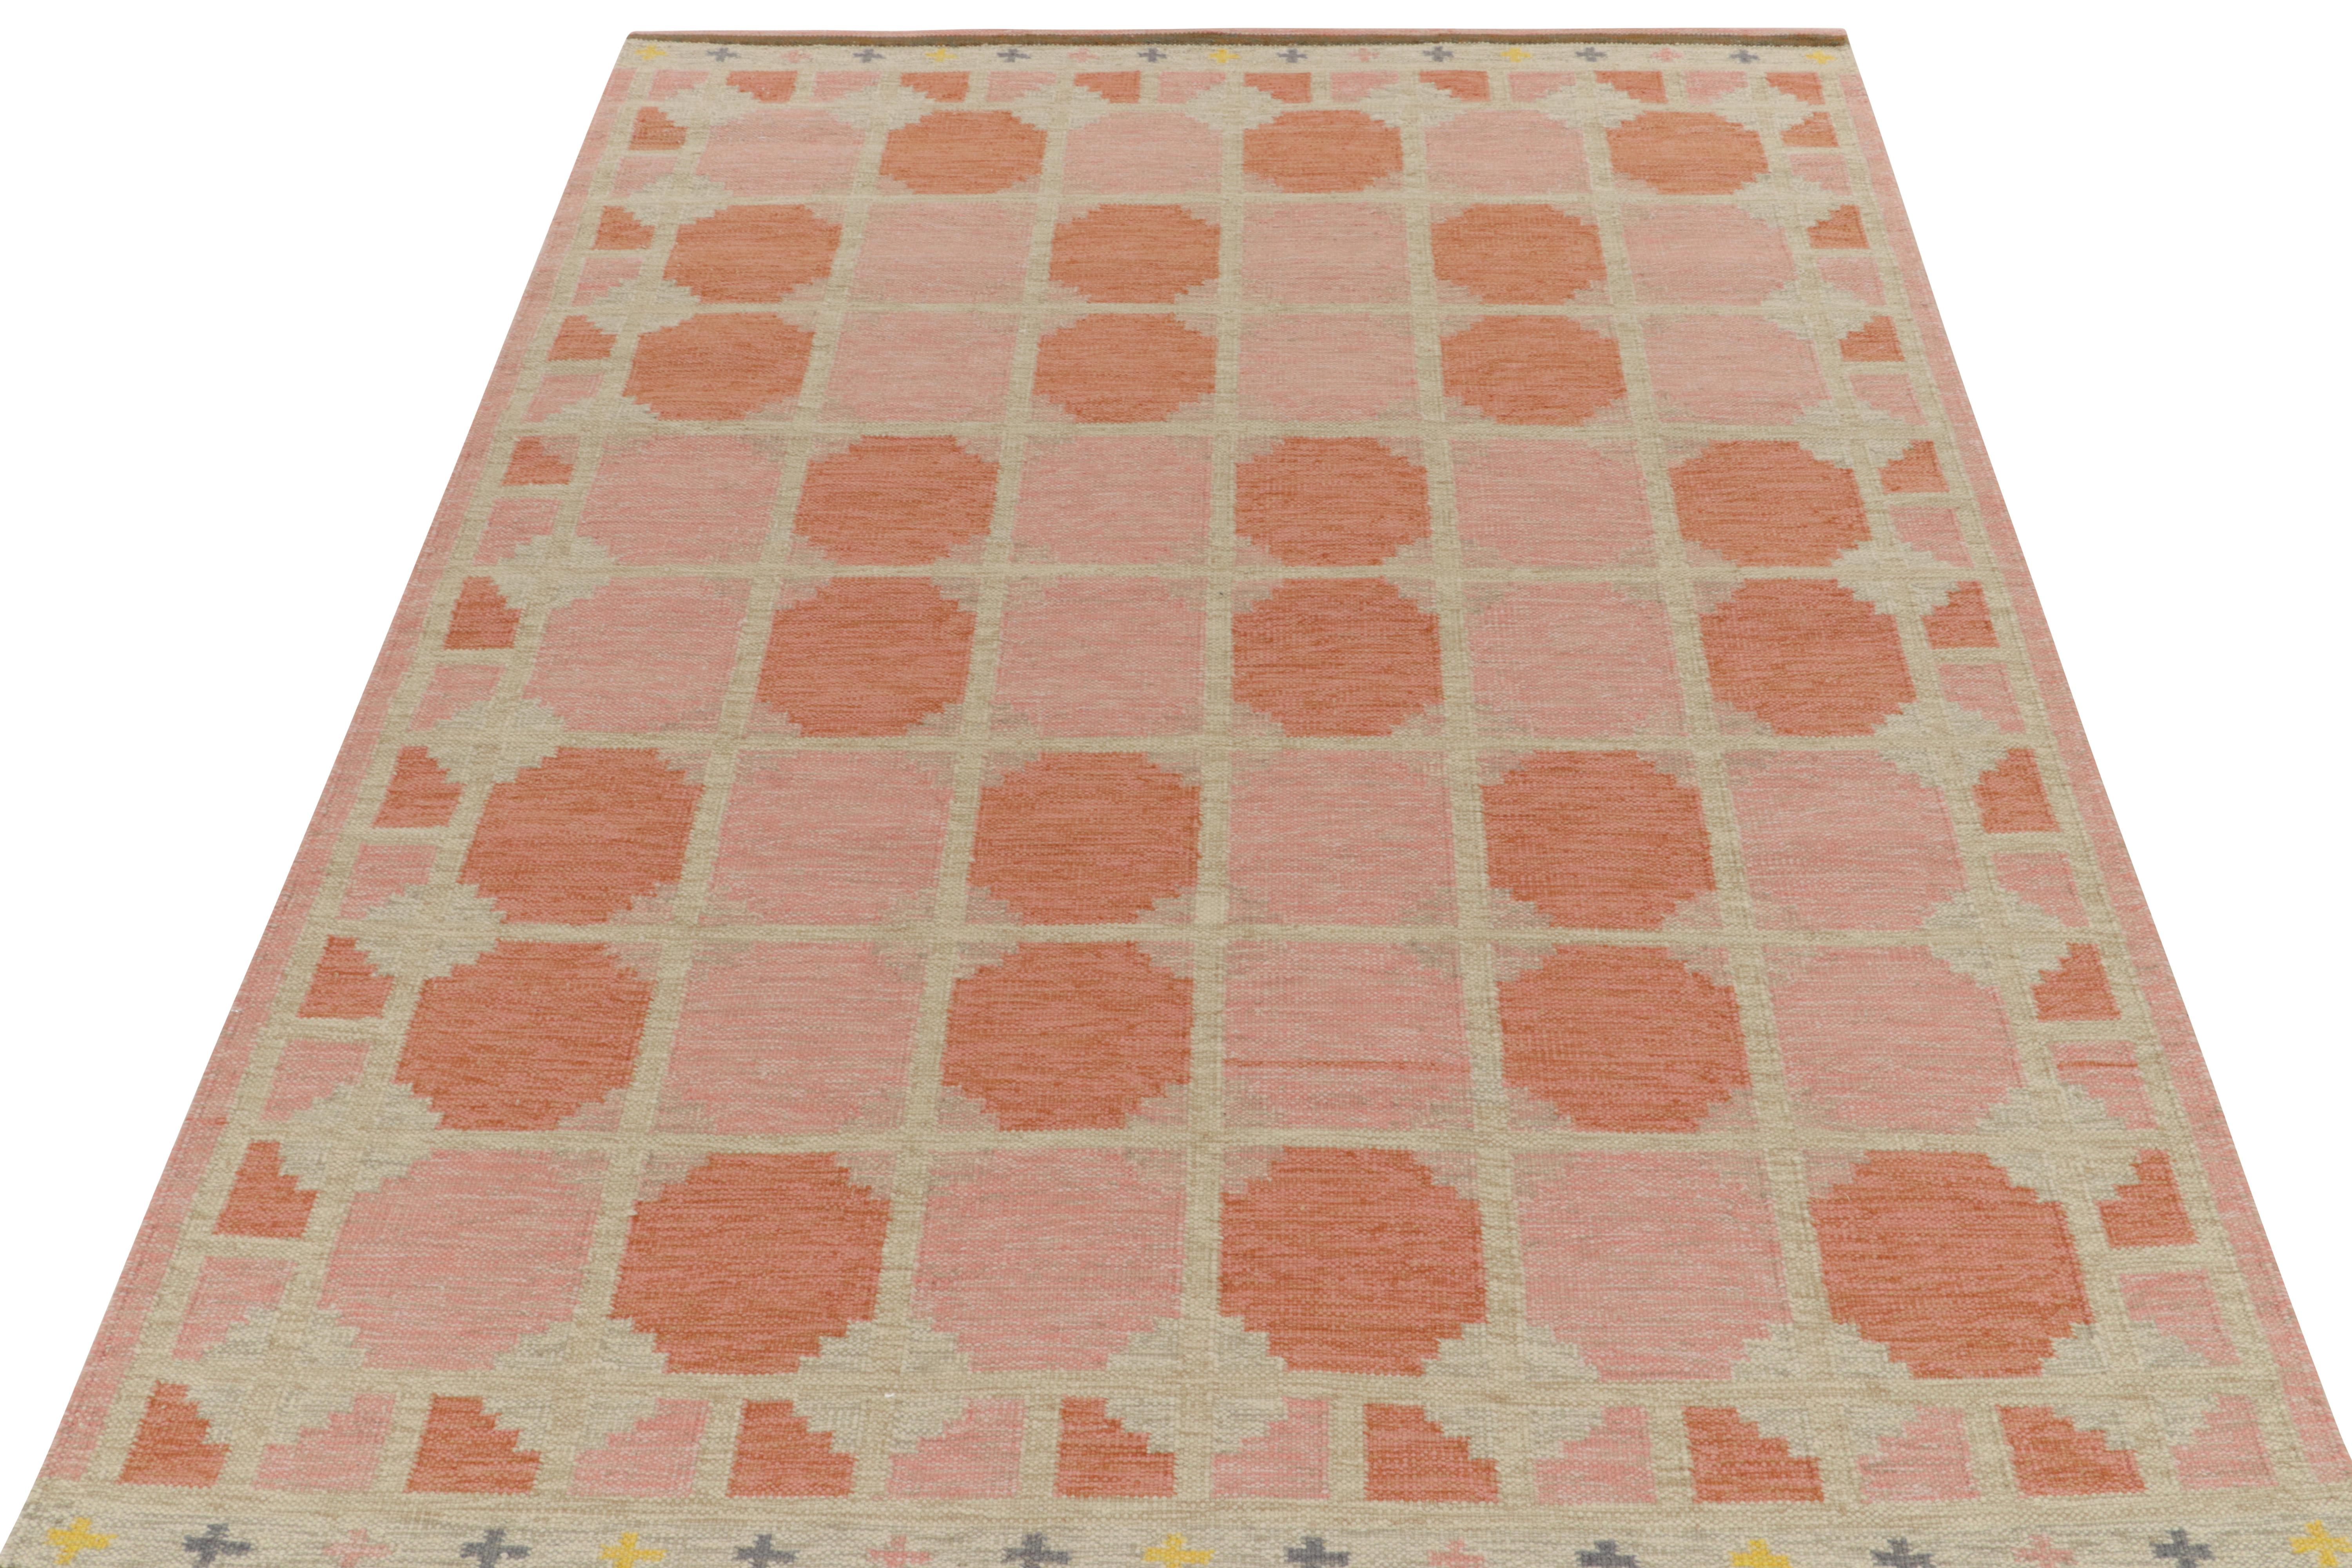 Connoting a contemporary take on vintage Swedish aesthetics, an 8 x 11 flat weave from Rug & Kilim’s award-winning Scandinavian Collection. The modern style Kilim adopts a classic Deco approach with an embellished joining at each crossing of the